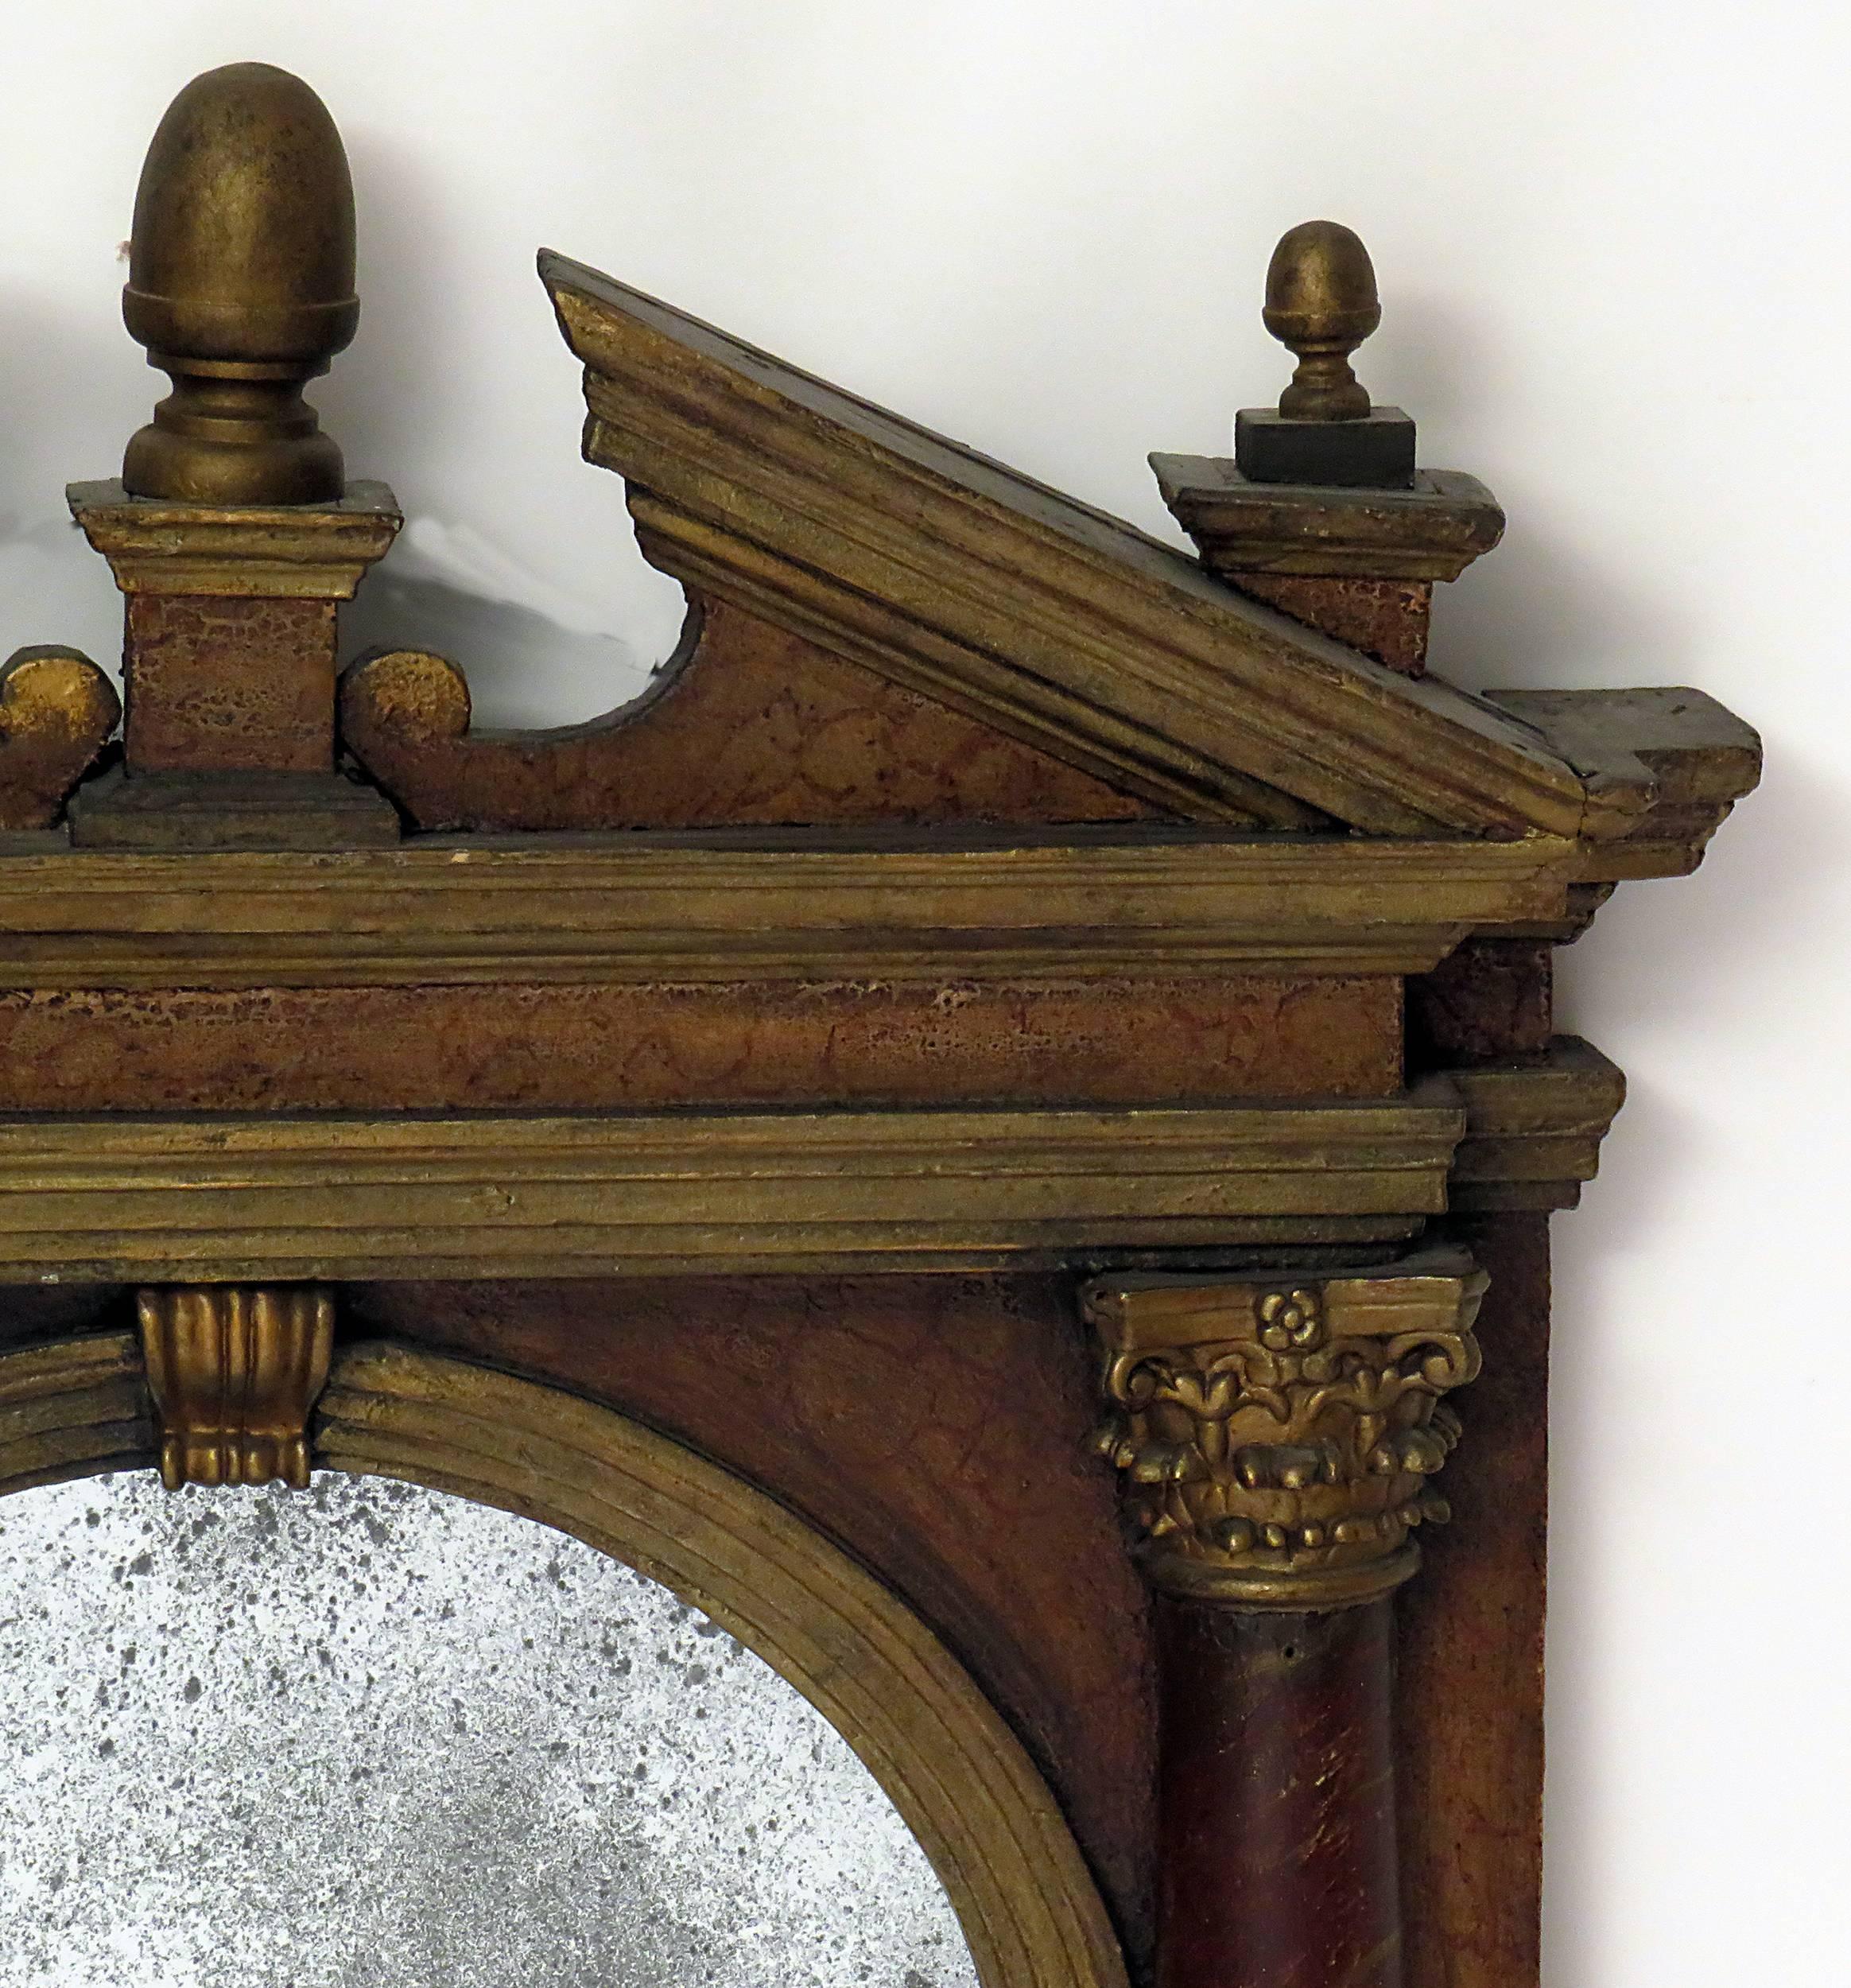 An Italian Baroque Tabernacle frame, circa 1750 painted, part gilt and carved wood with later antiqued mirror. Finial possibly later. A good example of an architectural frame first seen during the Italian Renaissance. Designed based on ancient